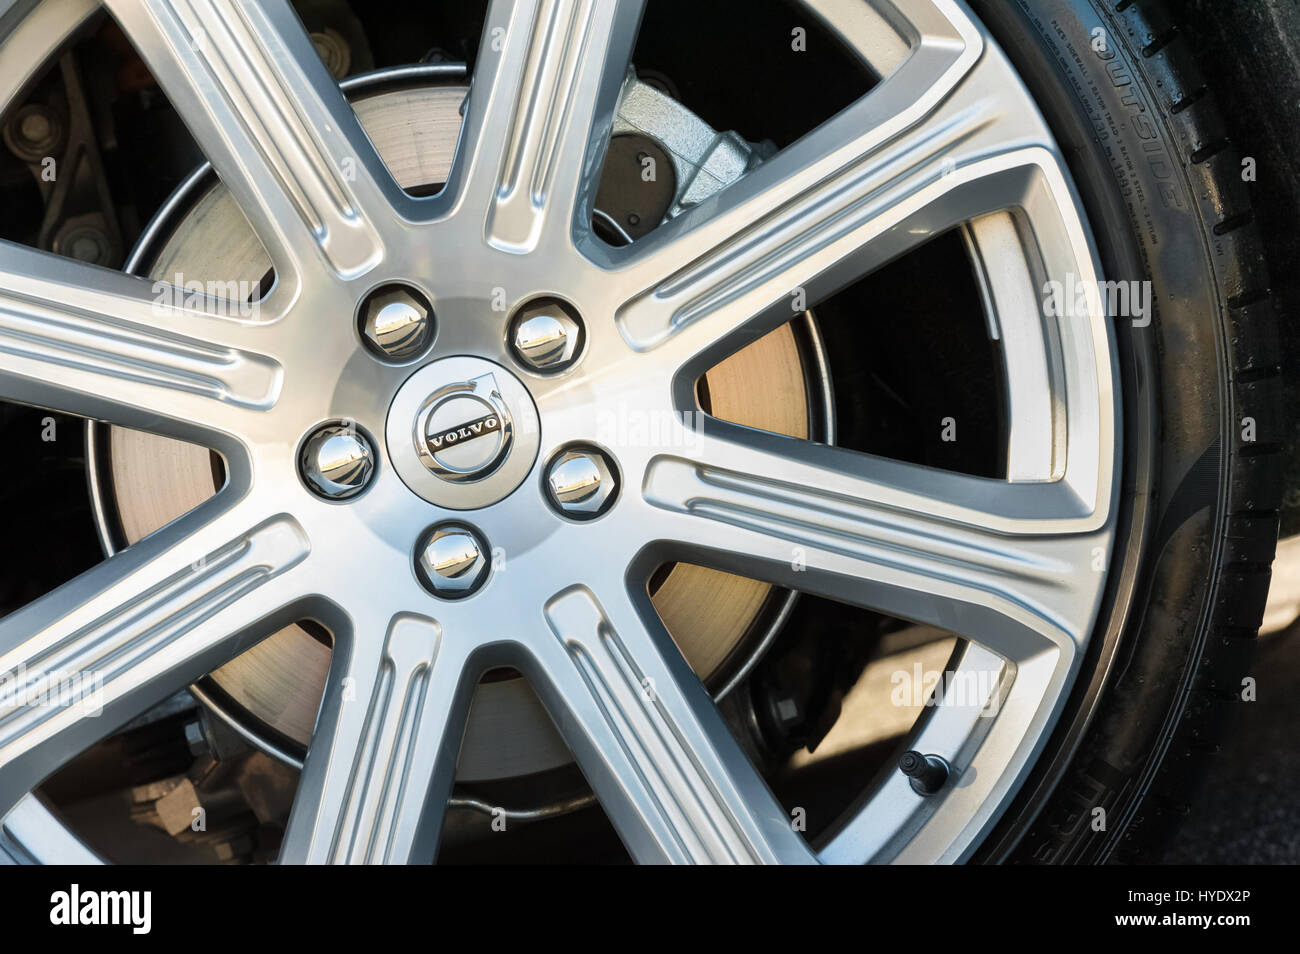 Laverstoke, UK - August 25, 2016: Closeup of chromed wheel and brake disc assembly on a vehicle manufactured by Swedish company Volvo Stock Photo